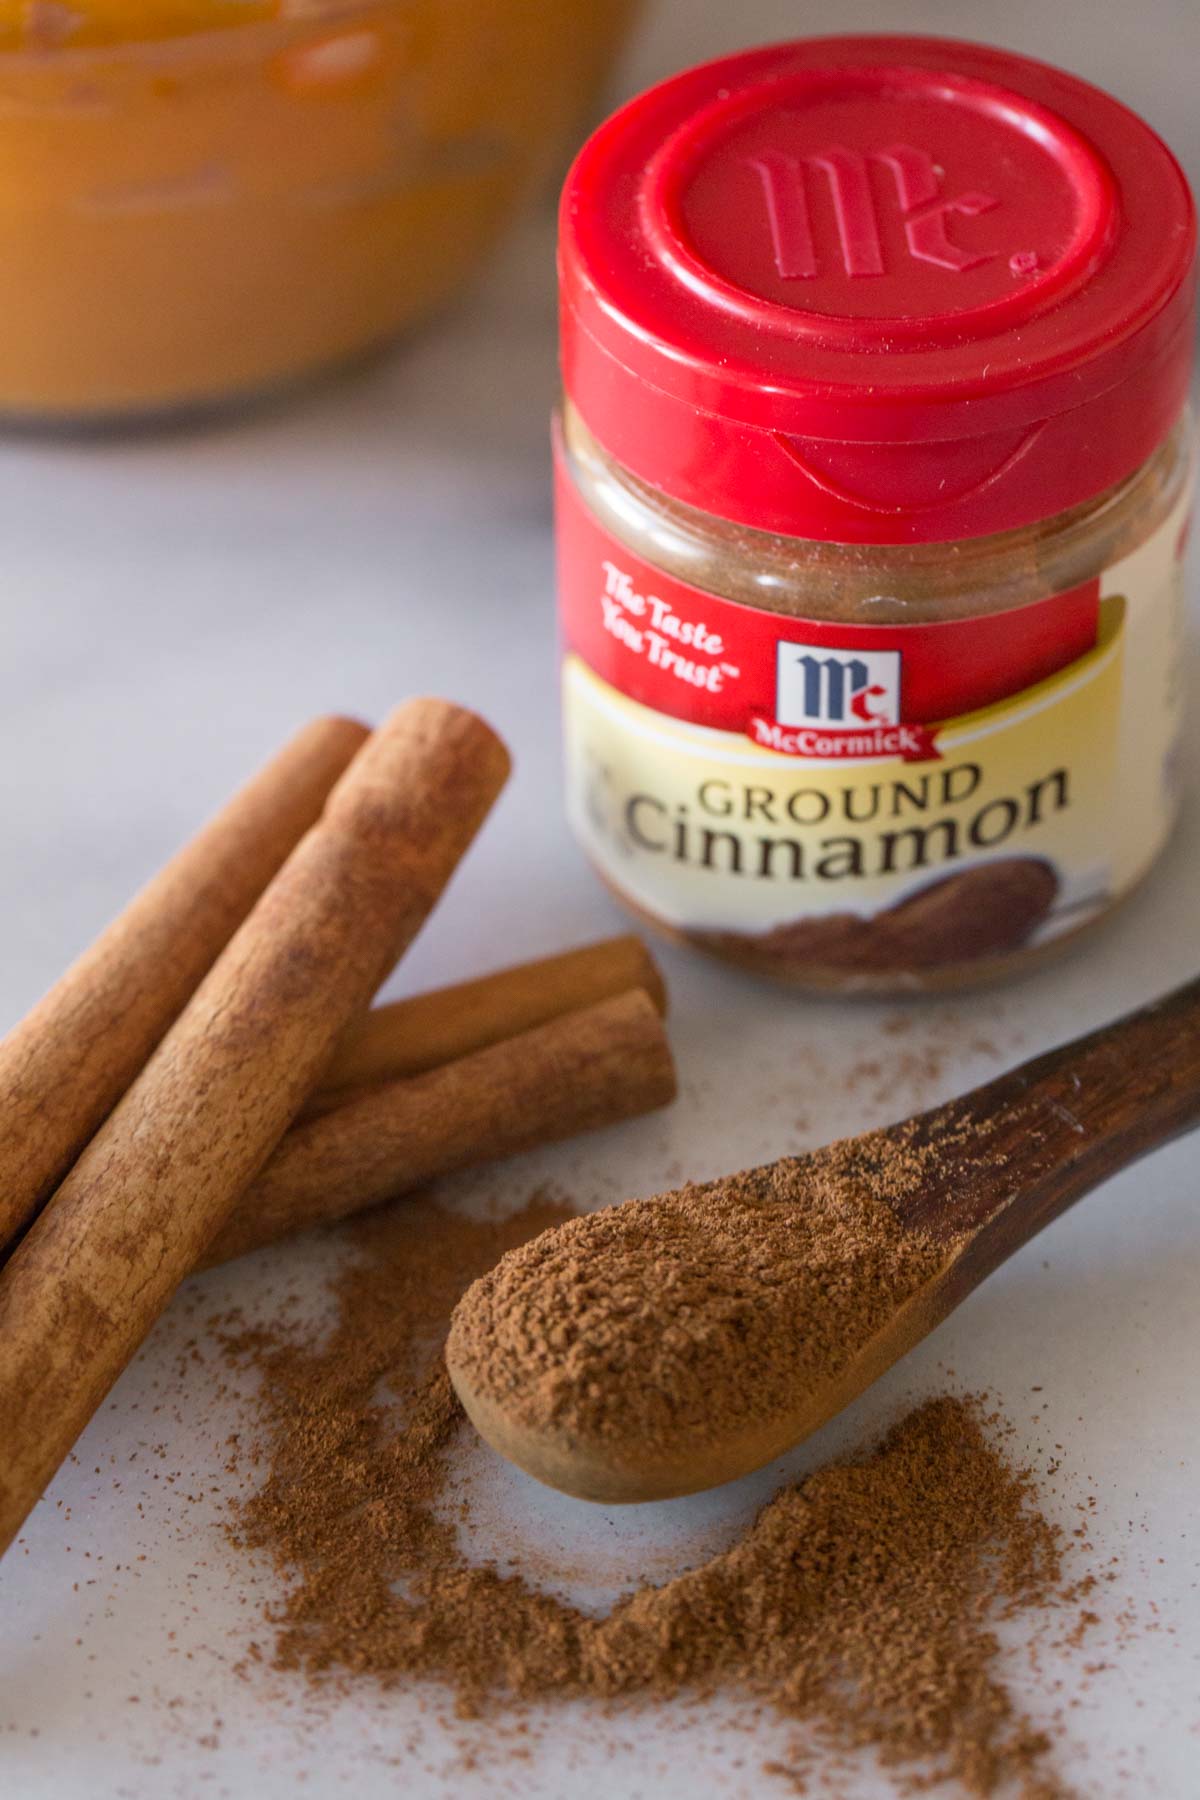 A McCormick spice container of Ground Cinnamon, with a few cinnamon sticks and a small wood spoon of ground cinnamon sitting in front of it.  